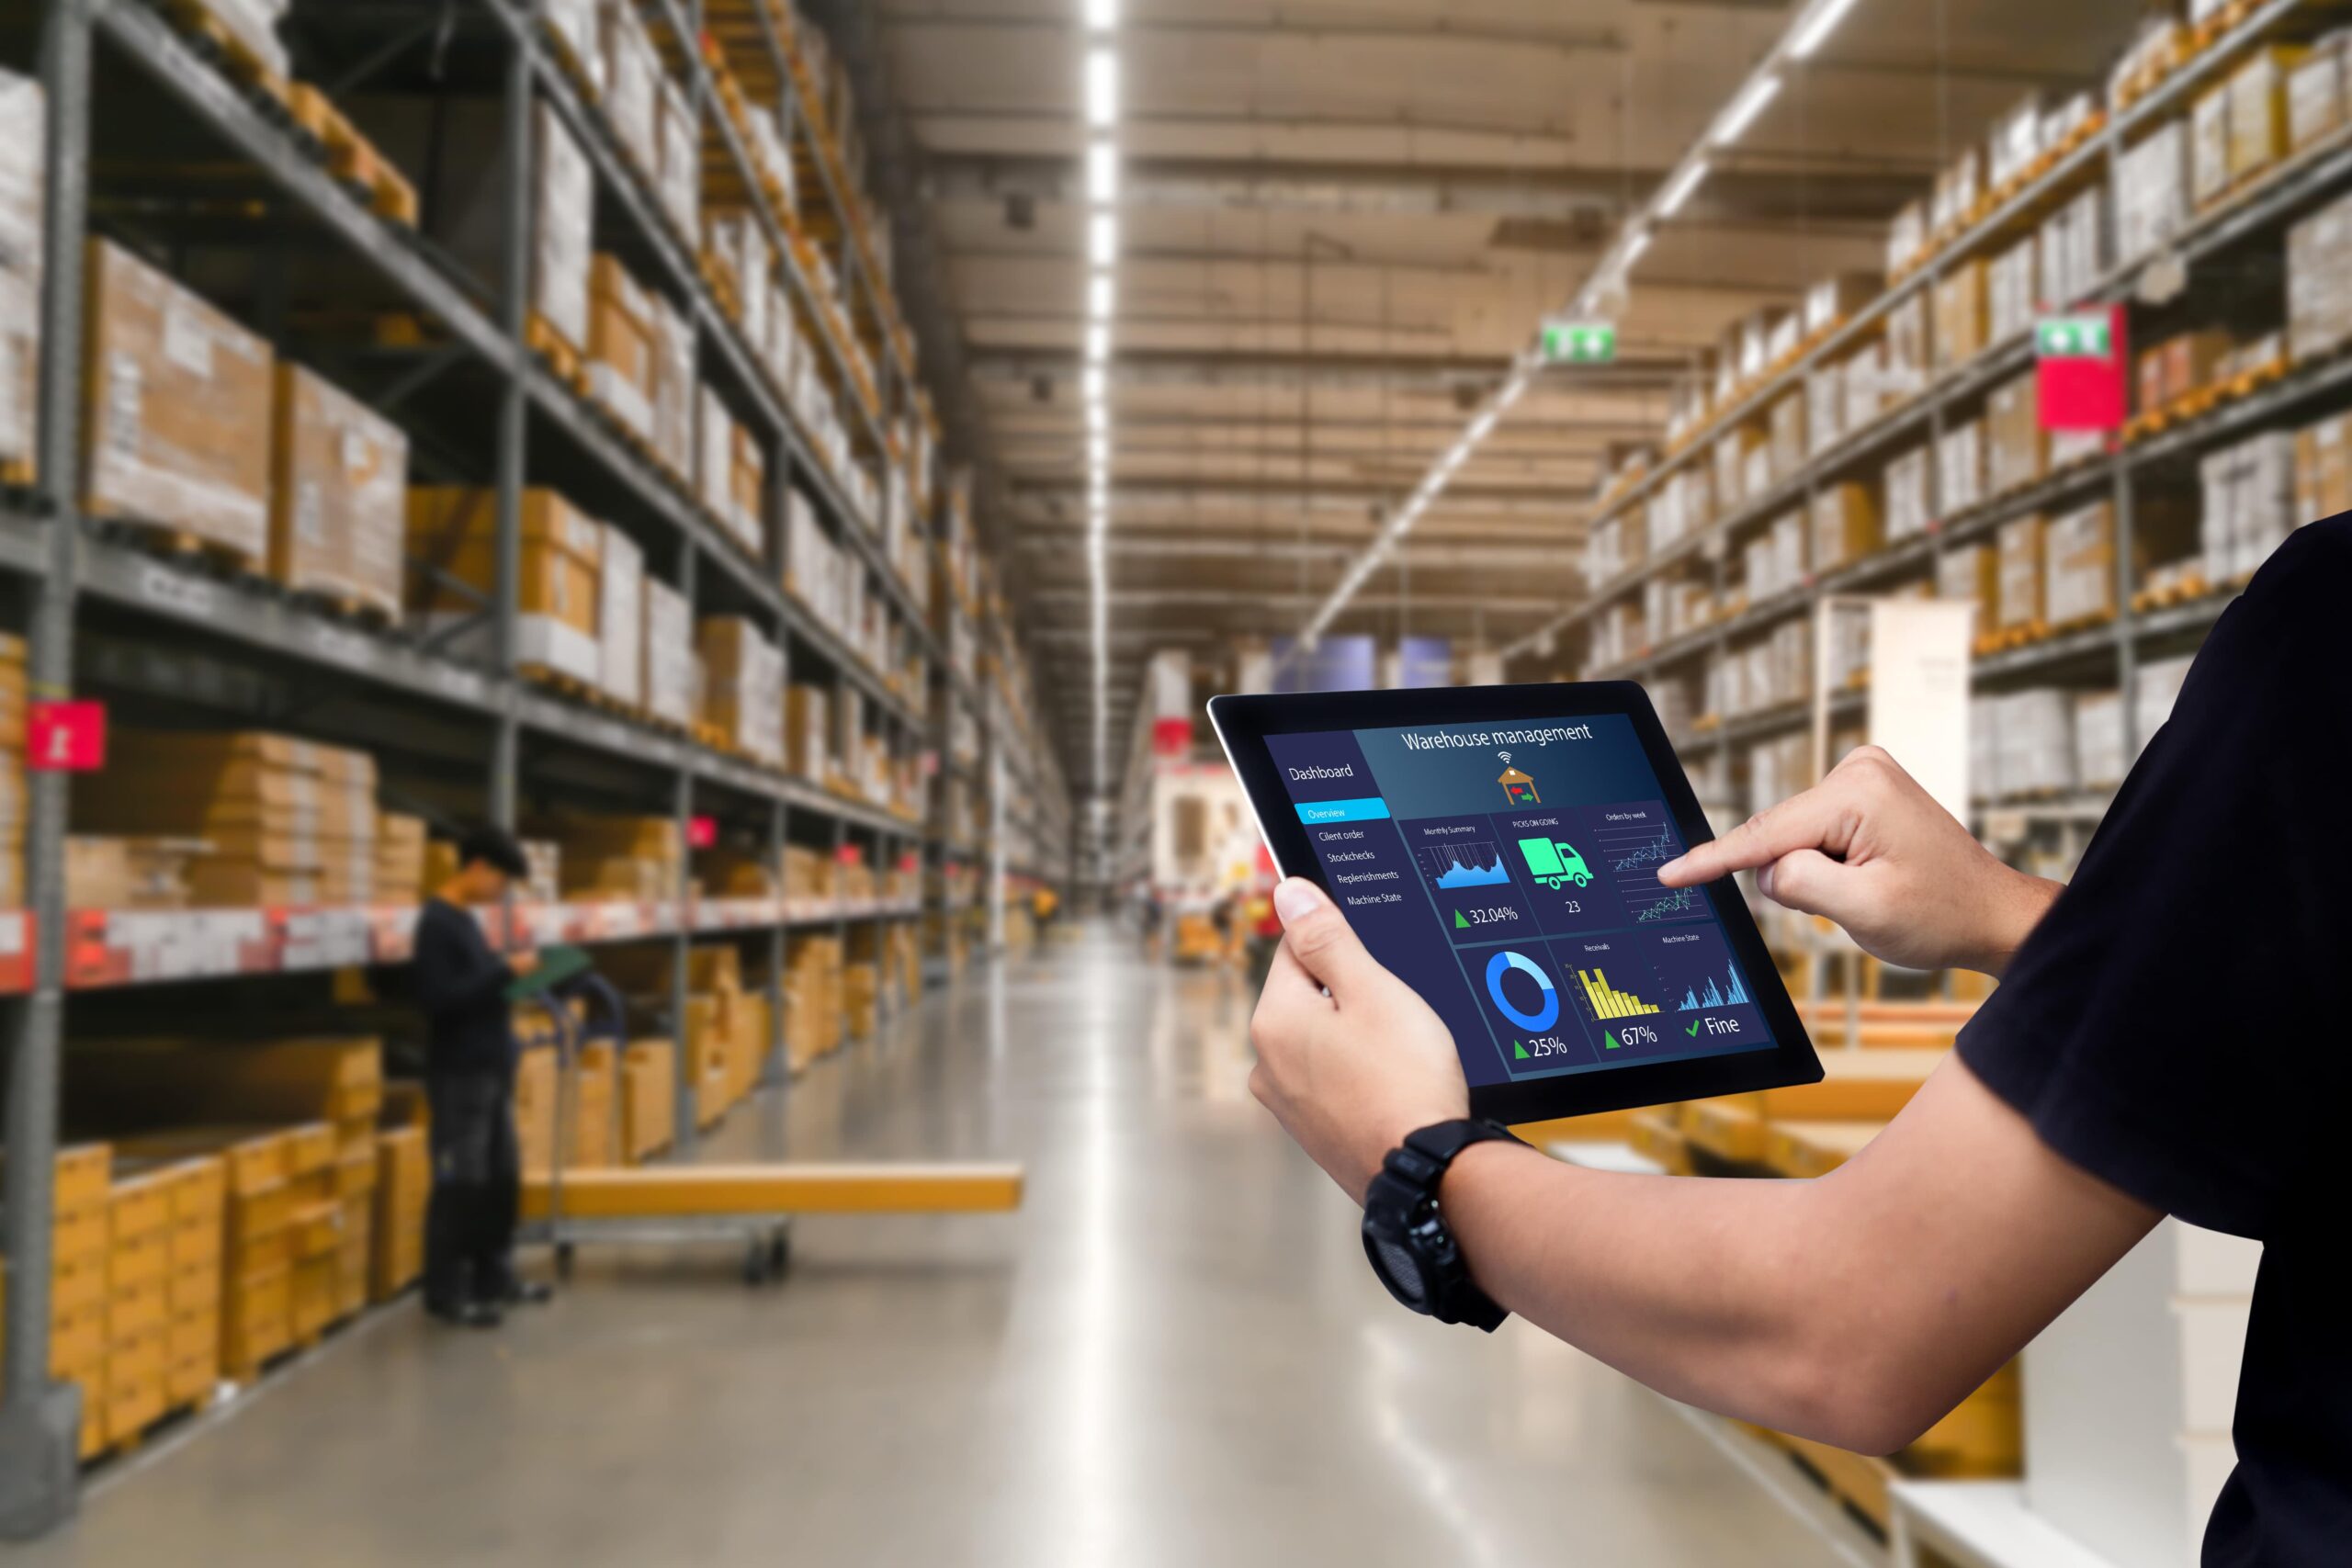 Man checks inventory in large warehouse using an ipad